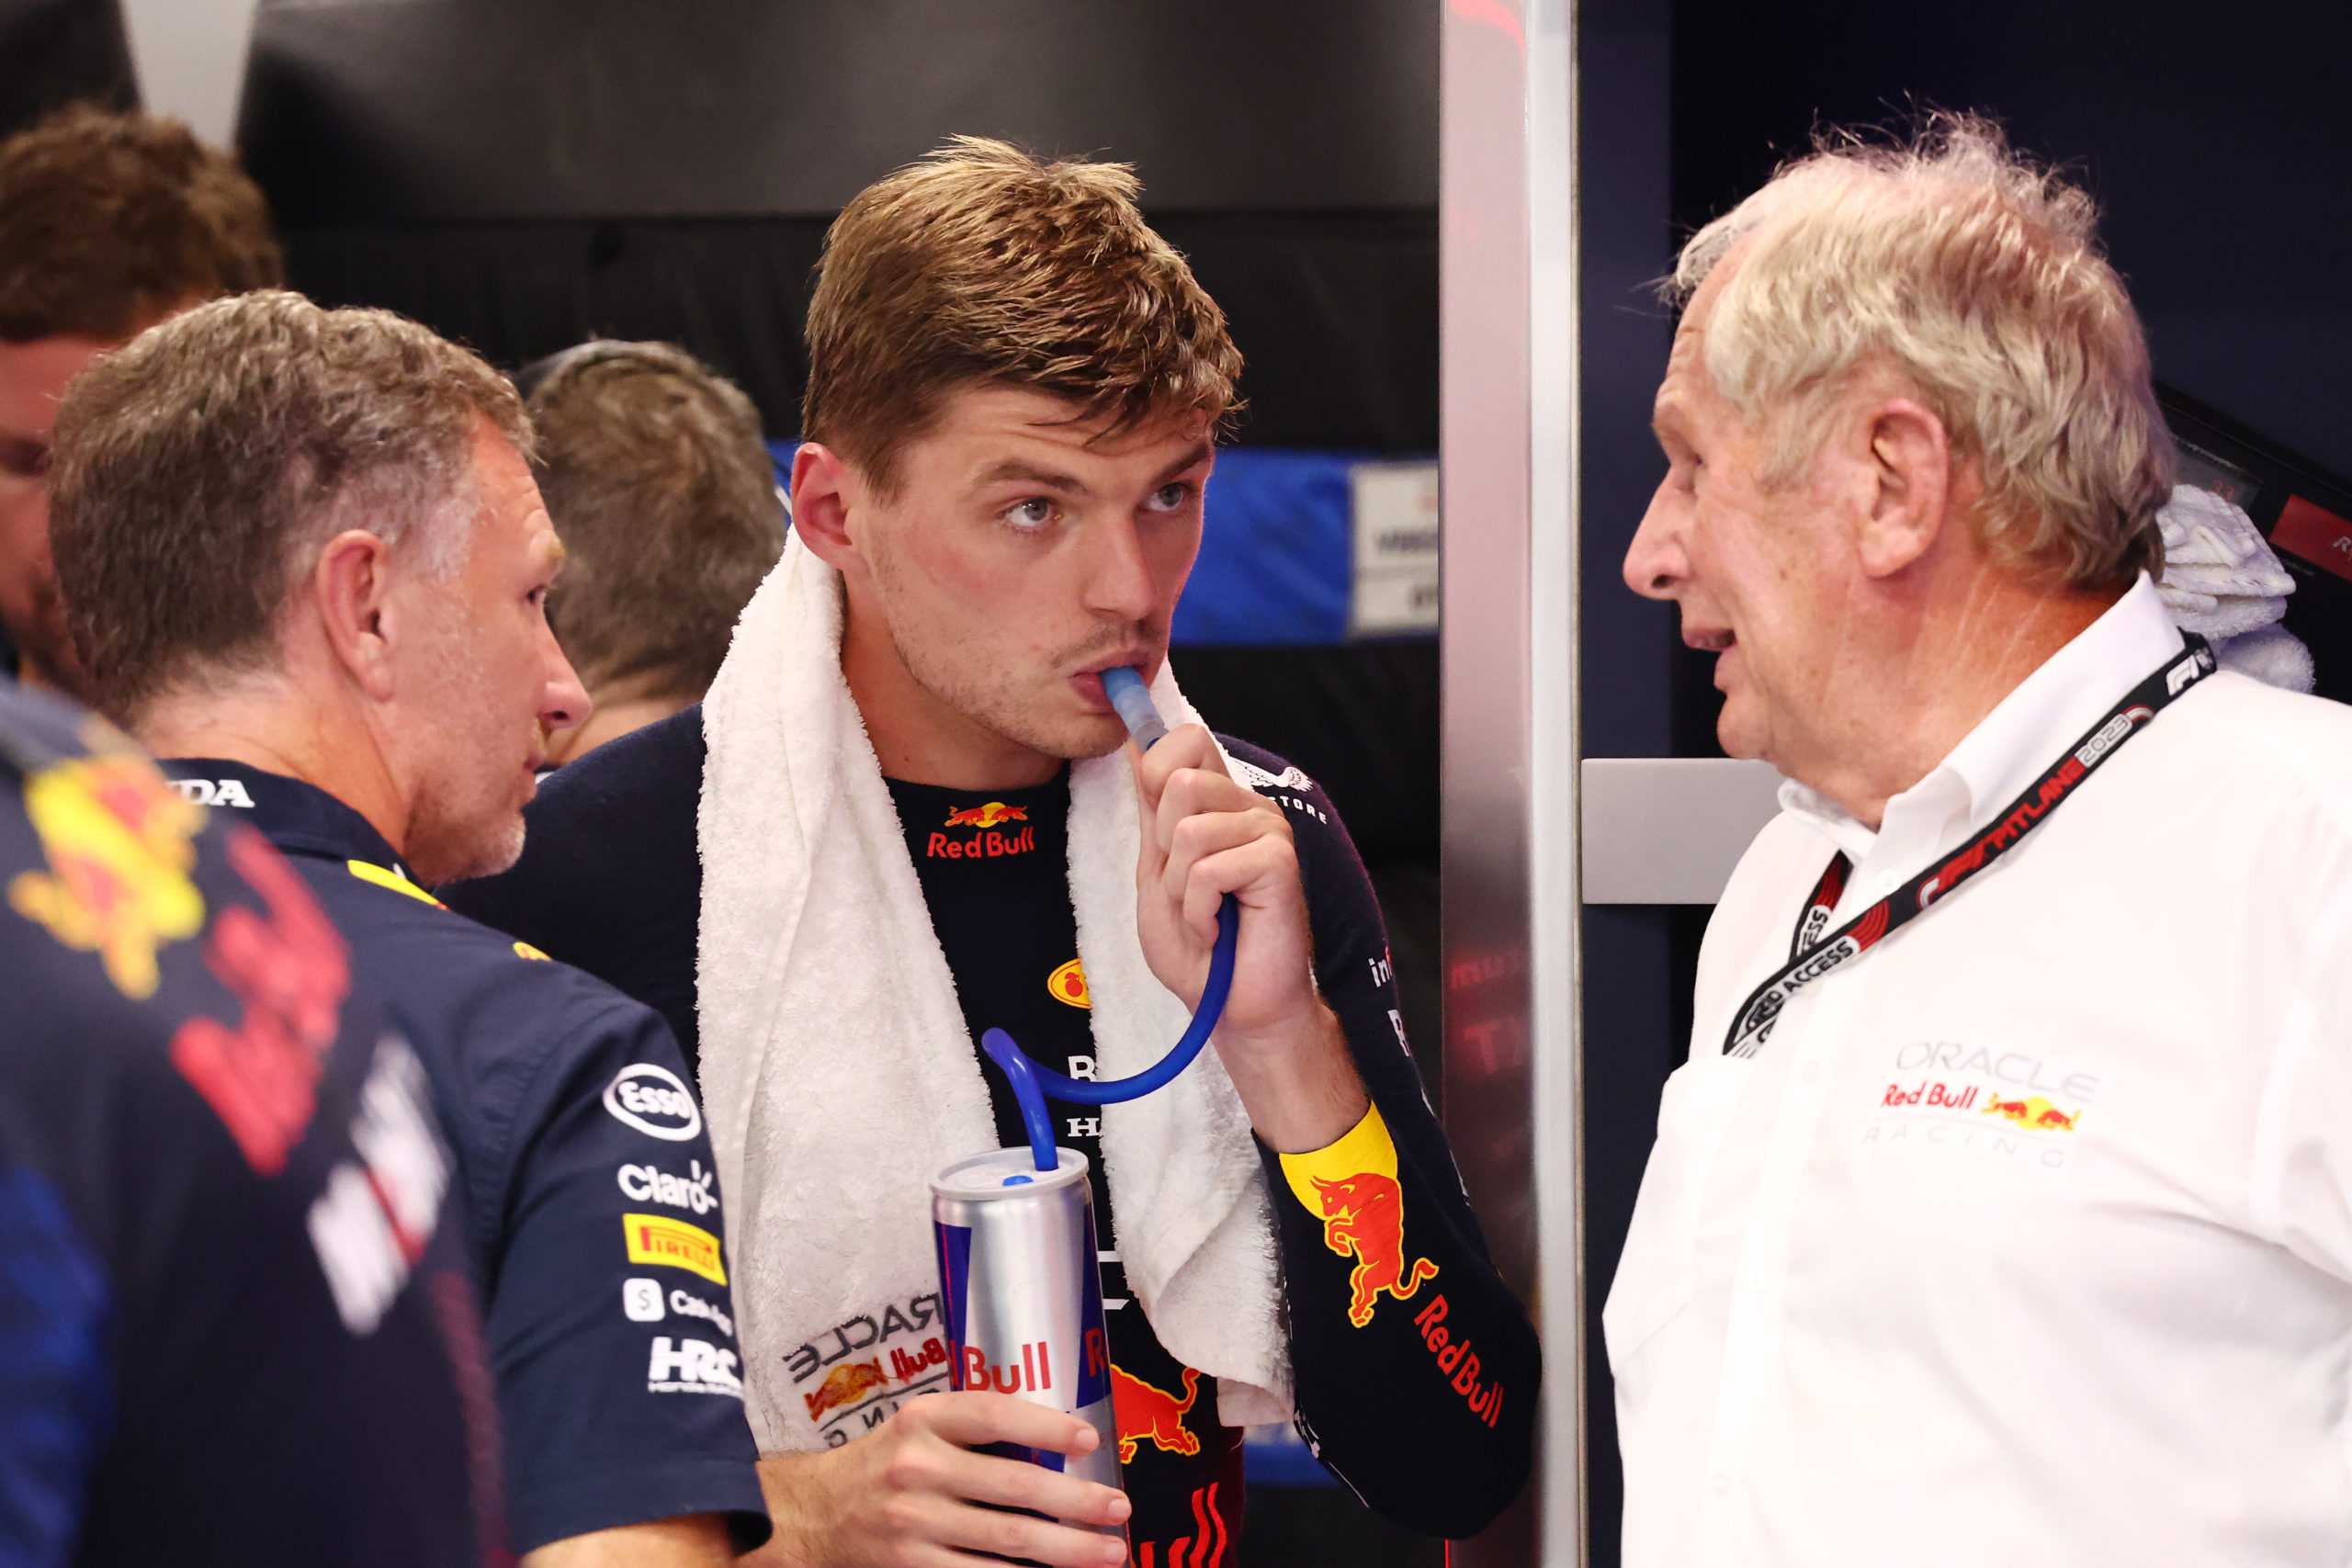 verstappen faces three investigations after nightmare f1 qualifying